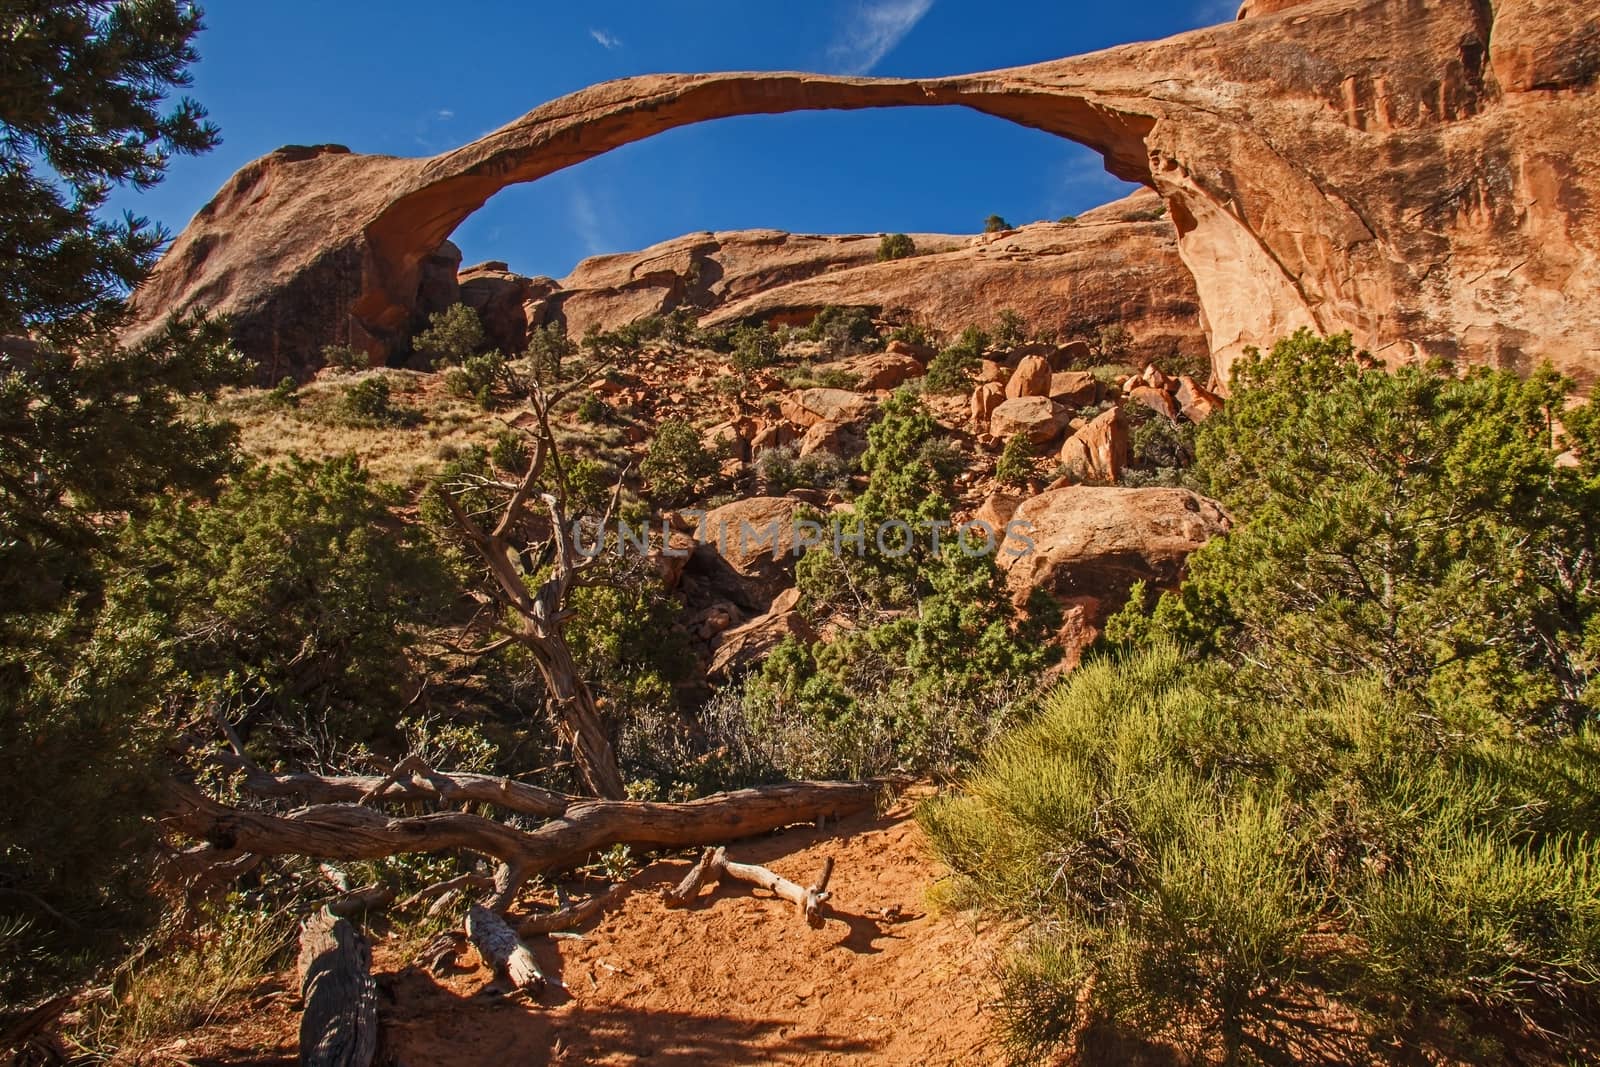 The Landscape Arch, Arches National Park Utah 4 by kobus_peche